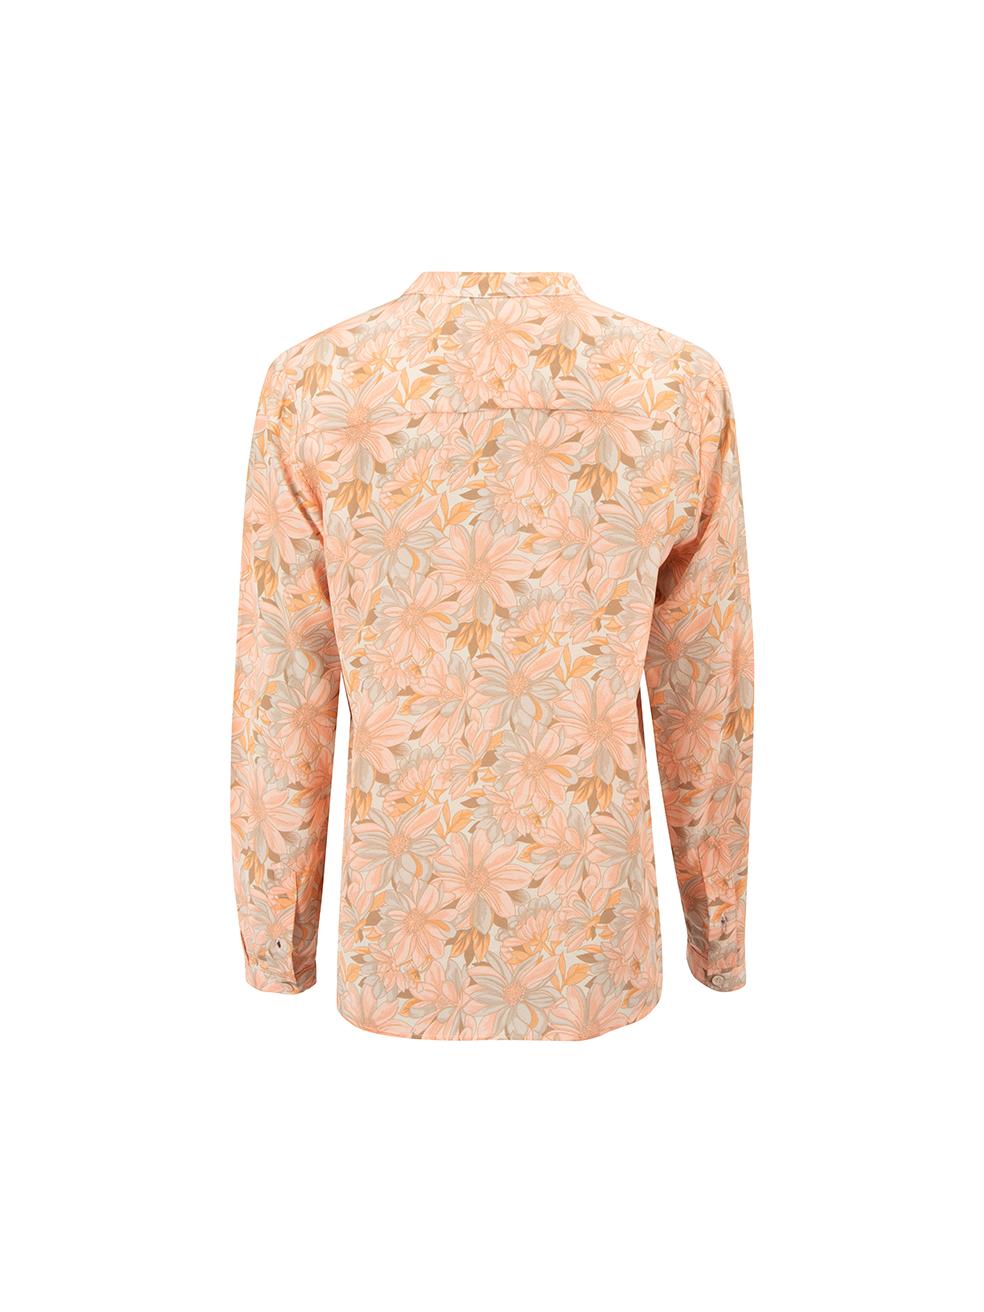 Stella McCartney Women's Pink Silk Floral Blouse In New Condition For Sale In London, GB